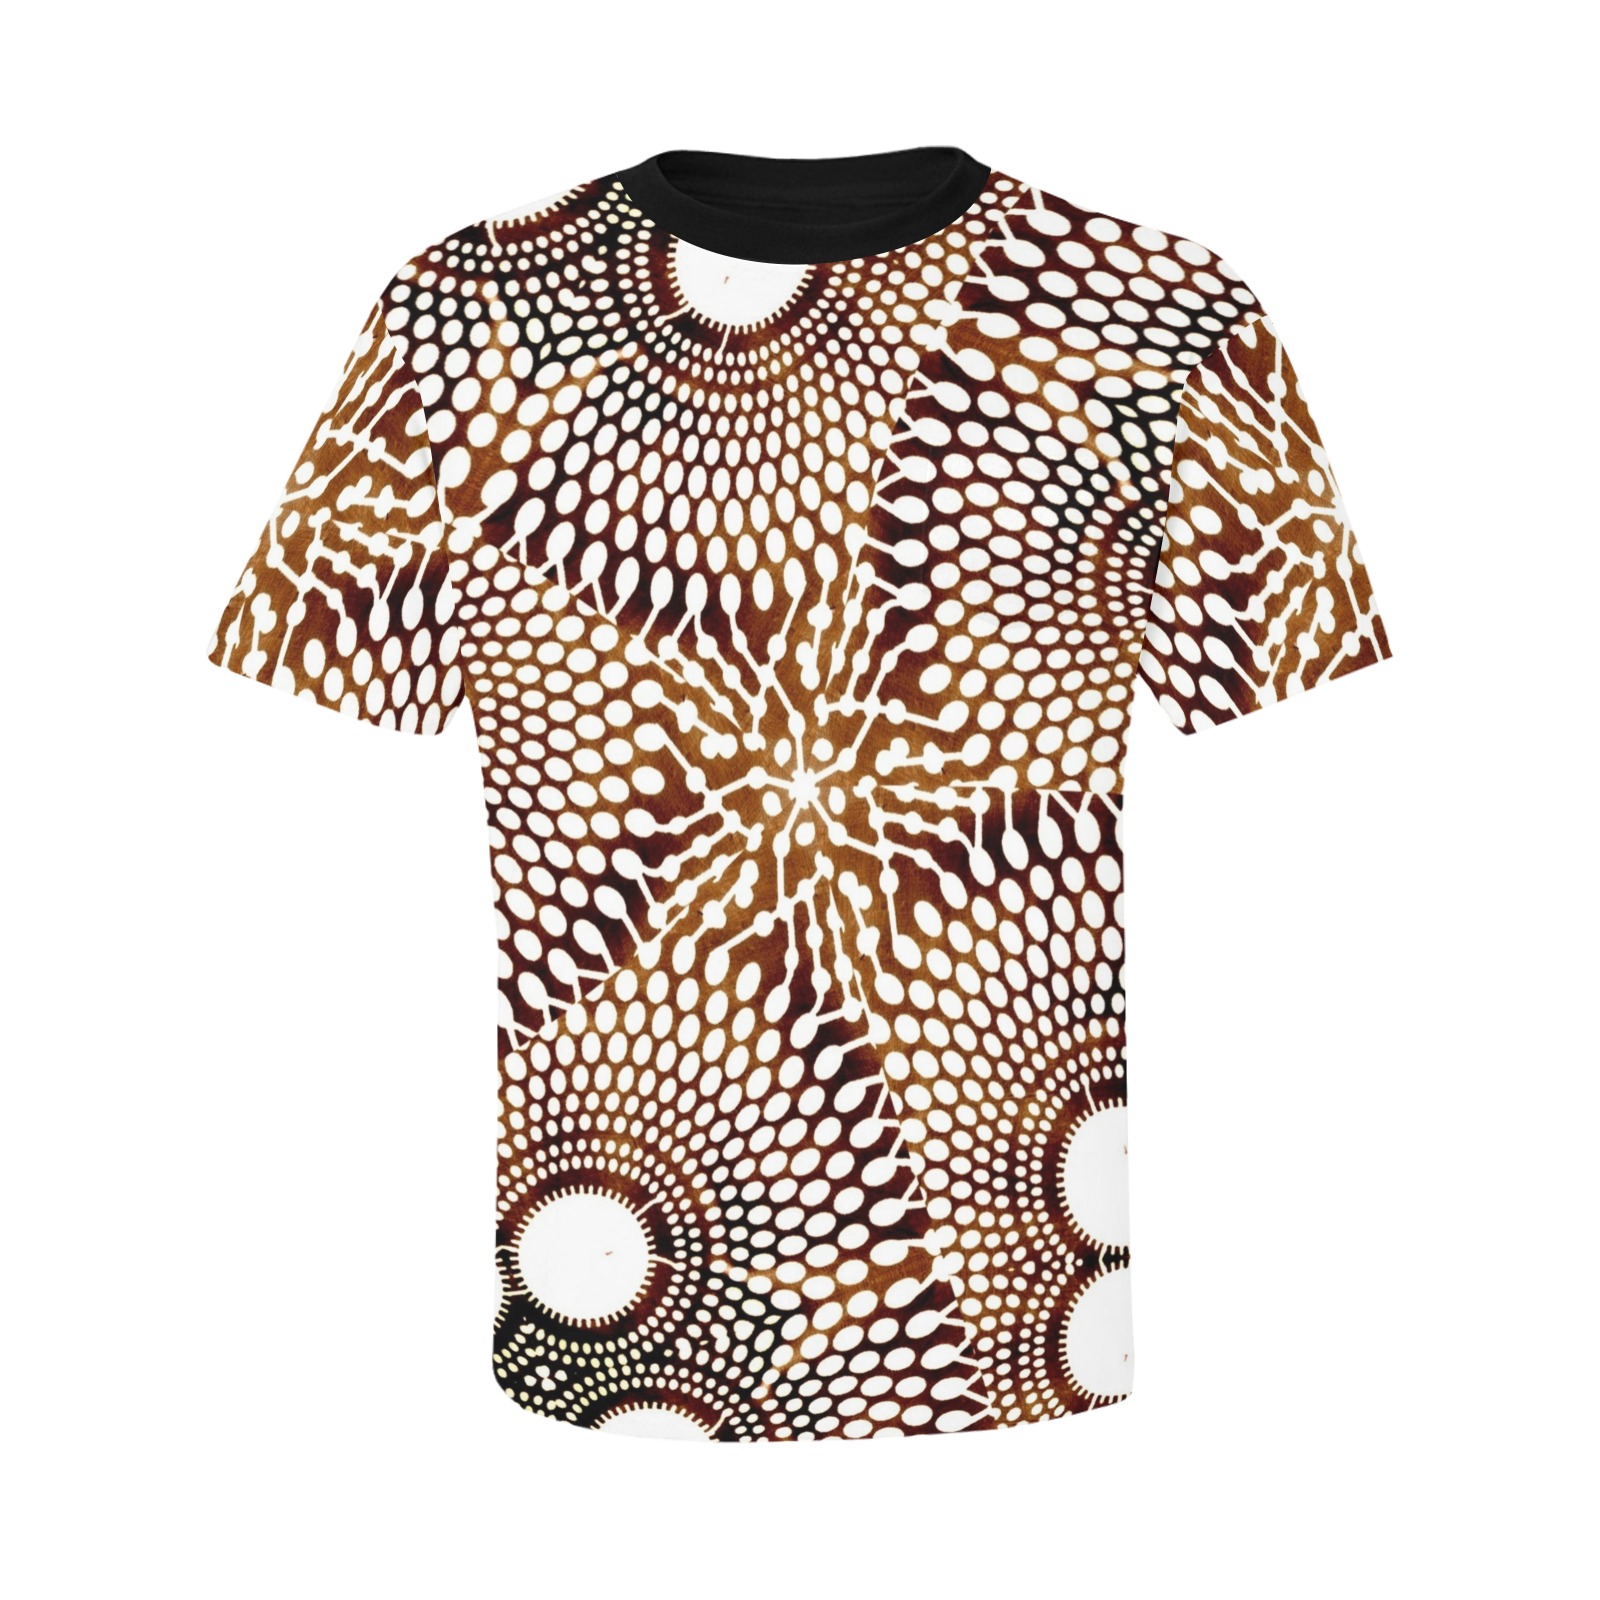 AFRICAN PRINT PATTERN 4 Men's All Over Print T-Shirt with Chest Pocket (Model T56)